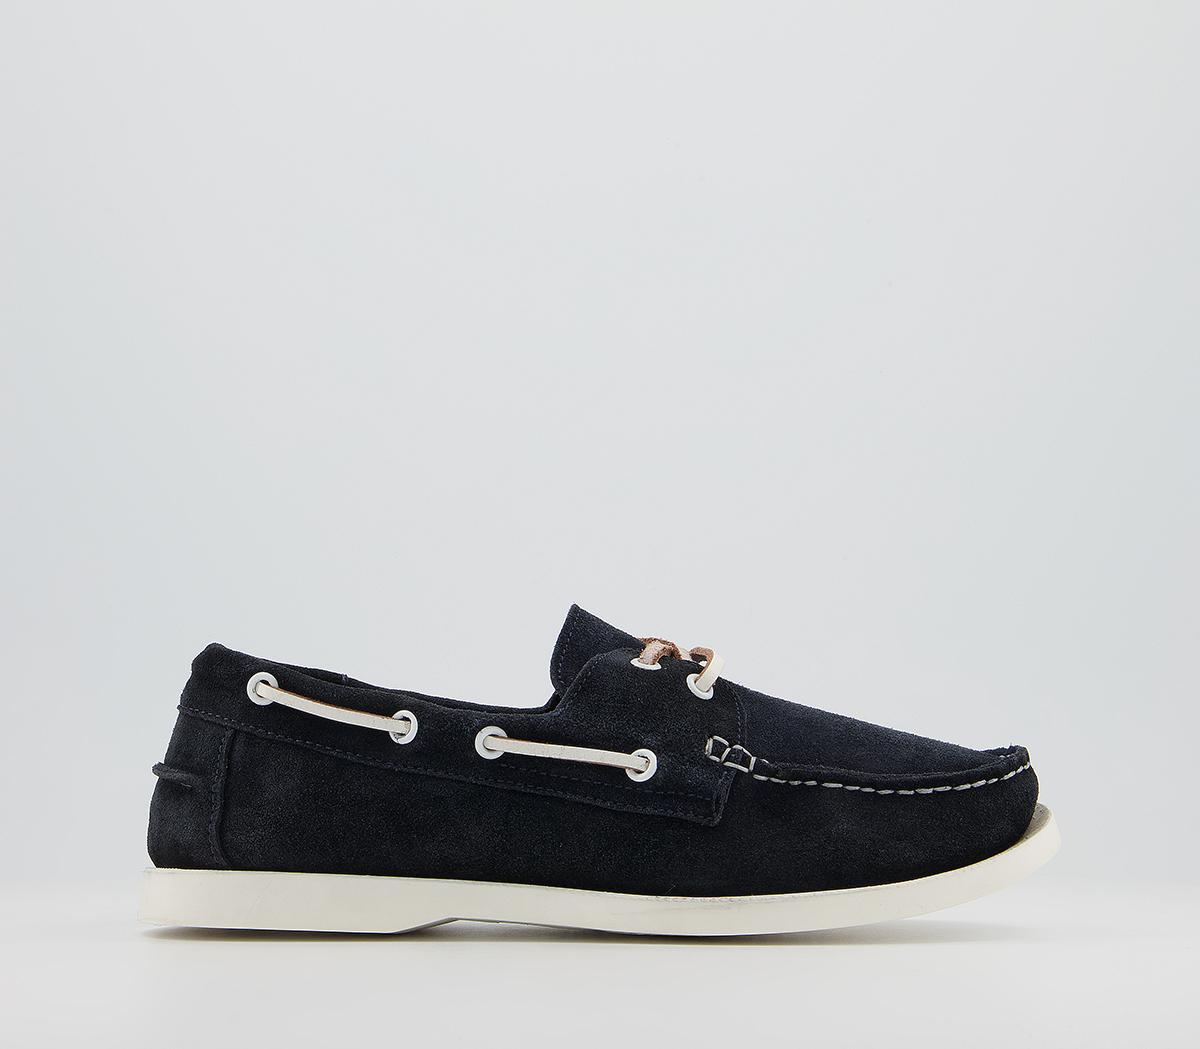 OFFICECabin Boat ShoesNavy Suede